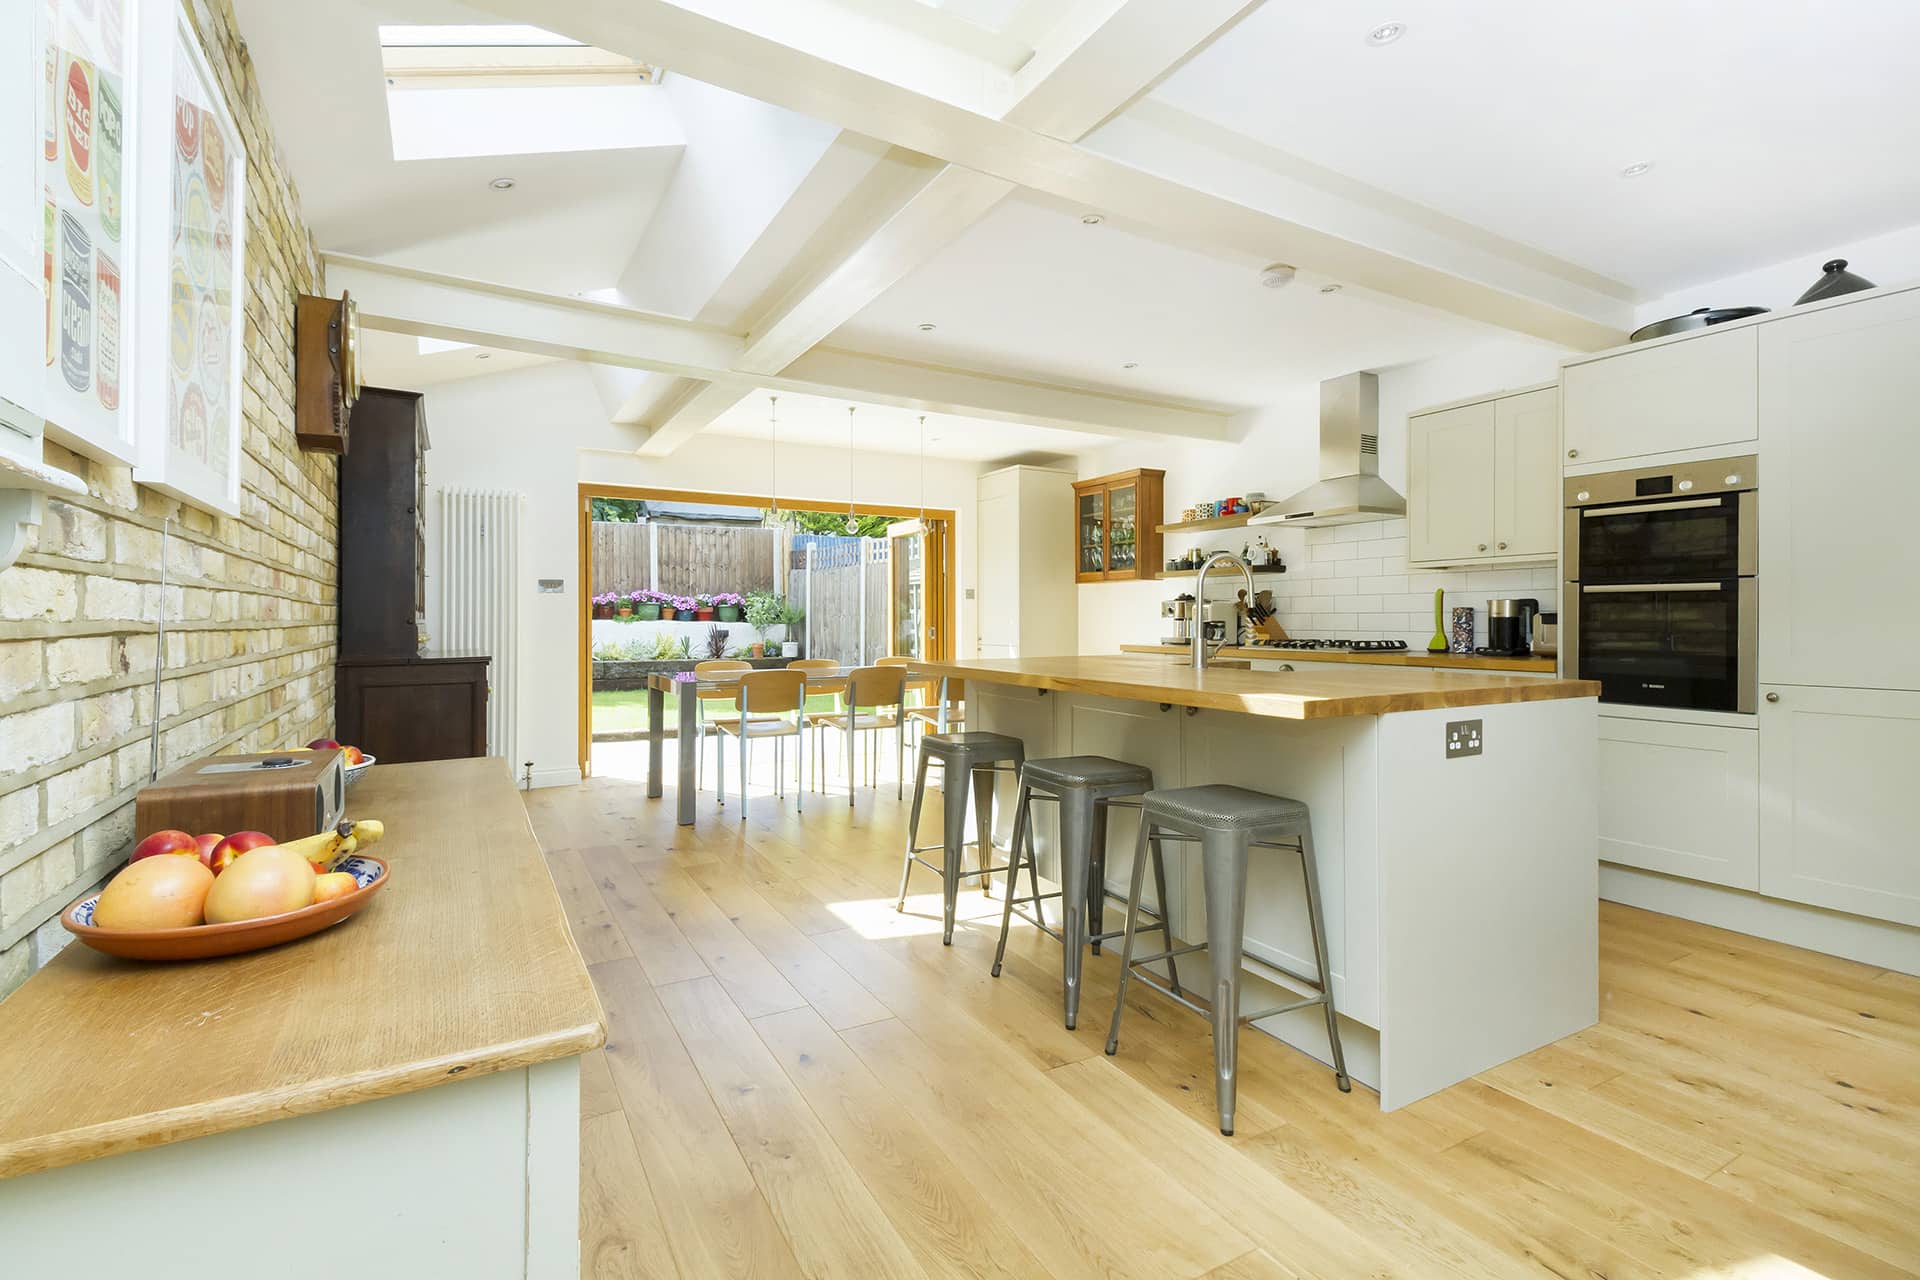 kitchen extensions